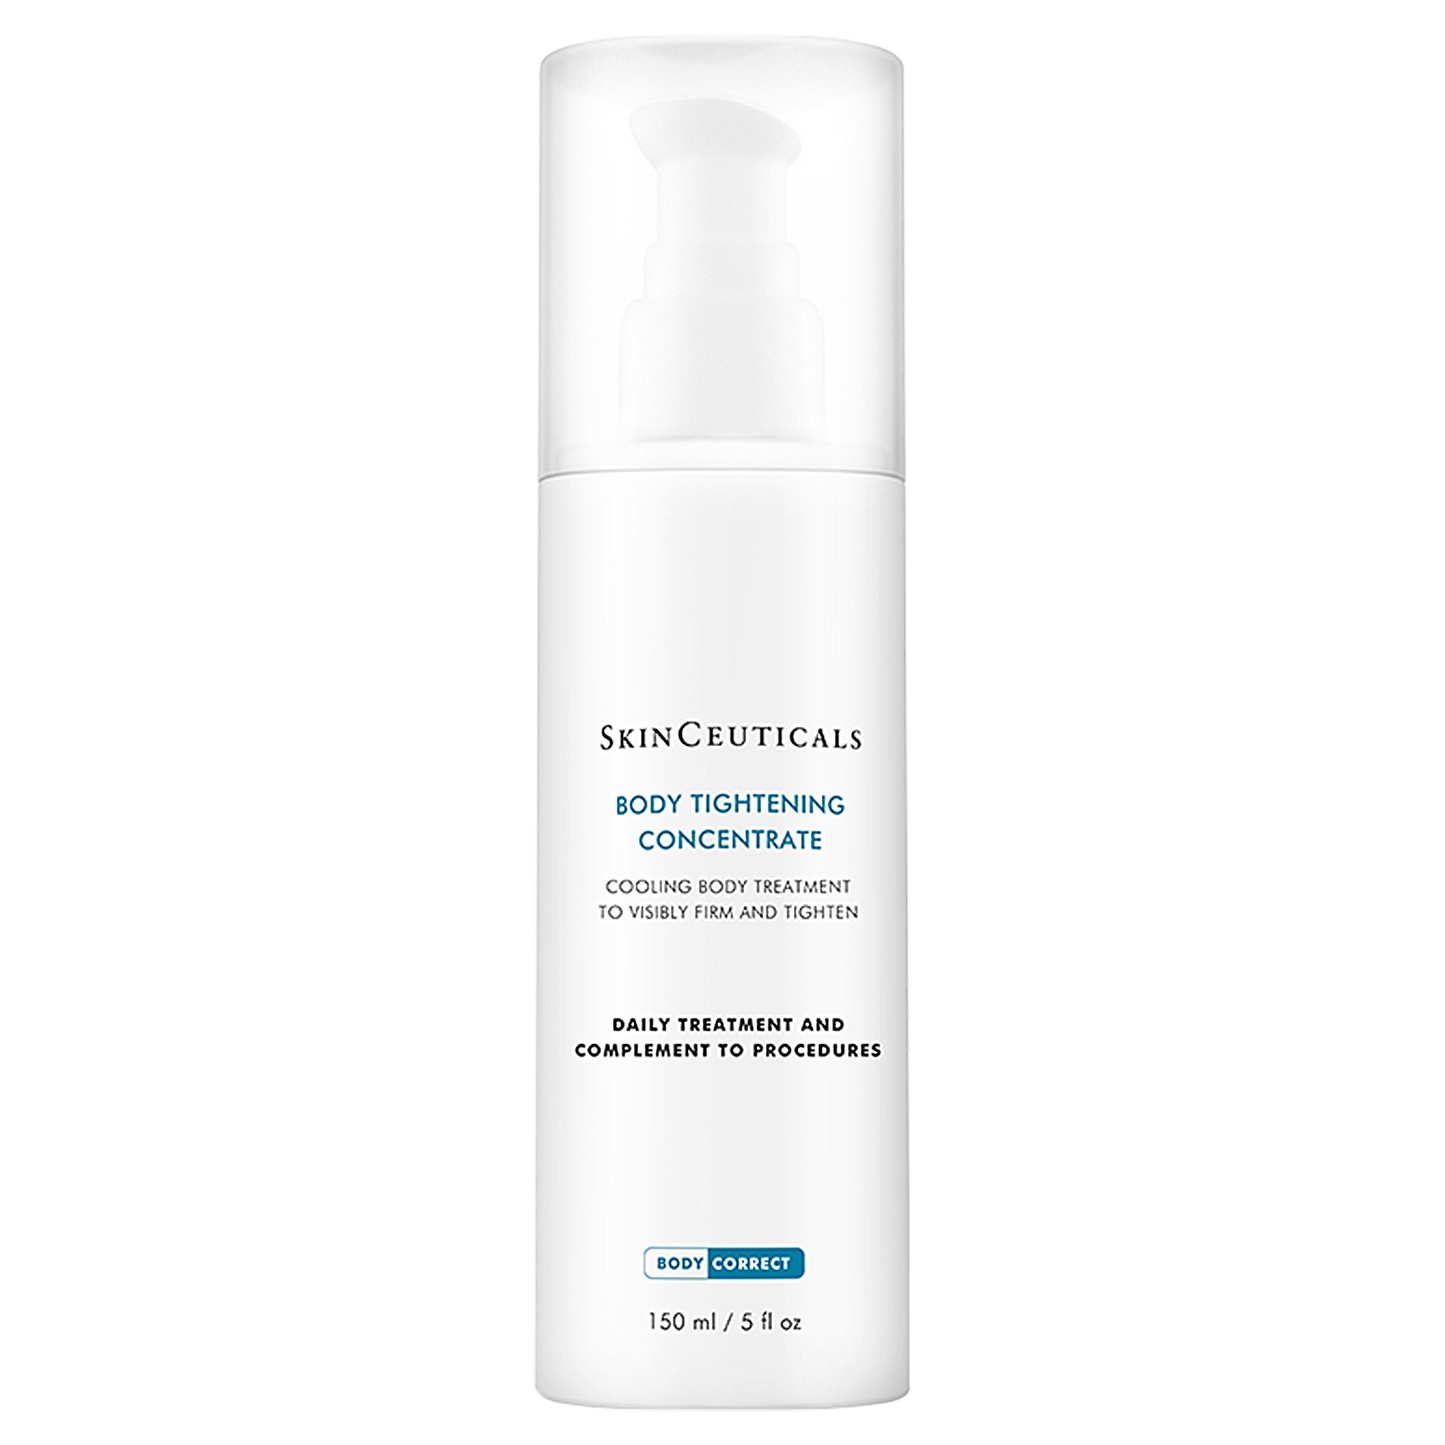 SKINCEUTICALS BODY TIGHTENING CONCENTRATE 150ML / 5FL OZ